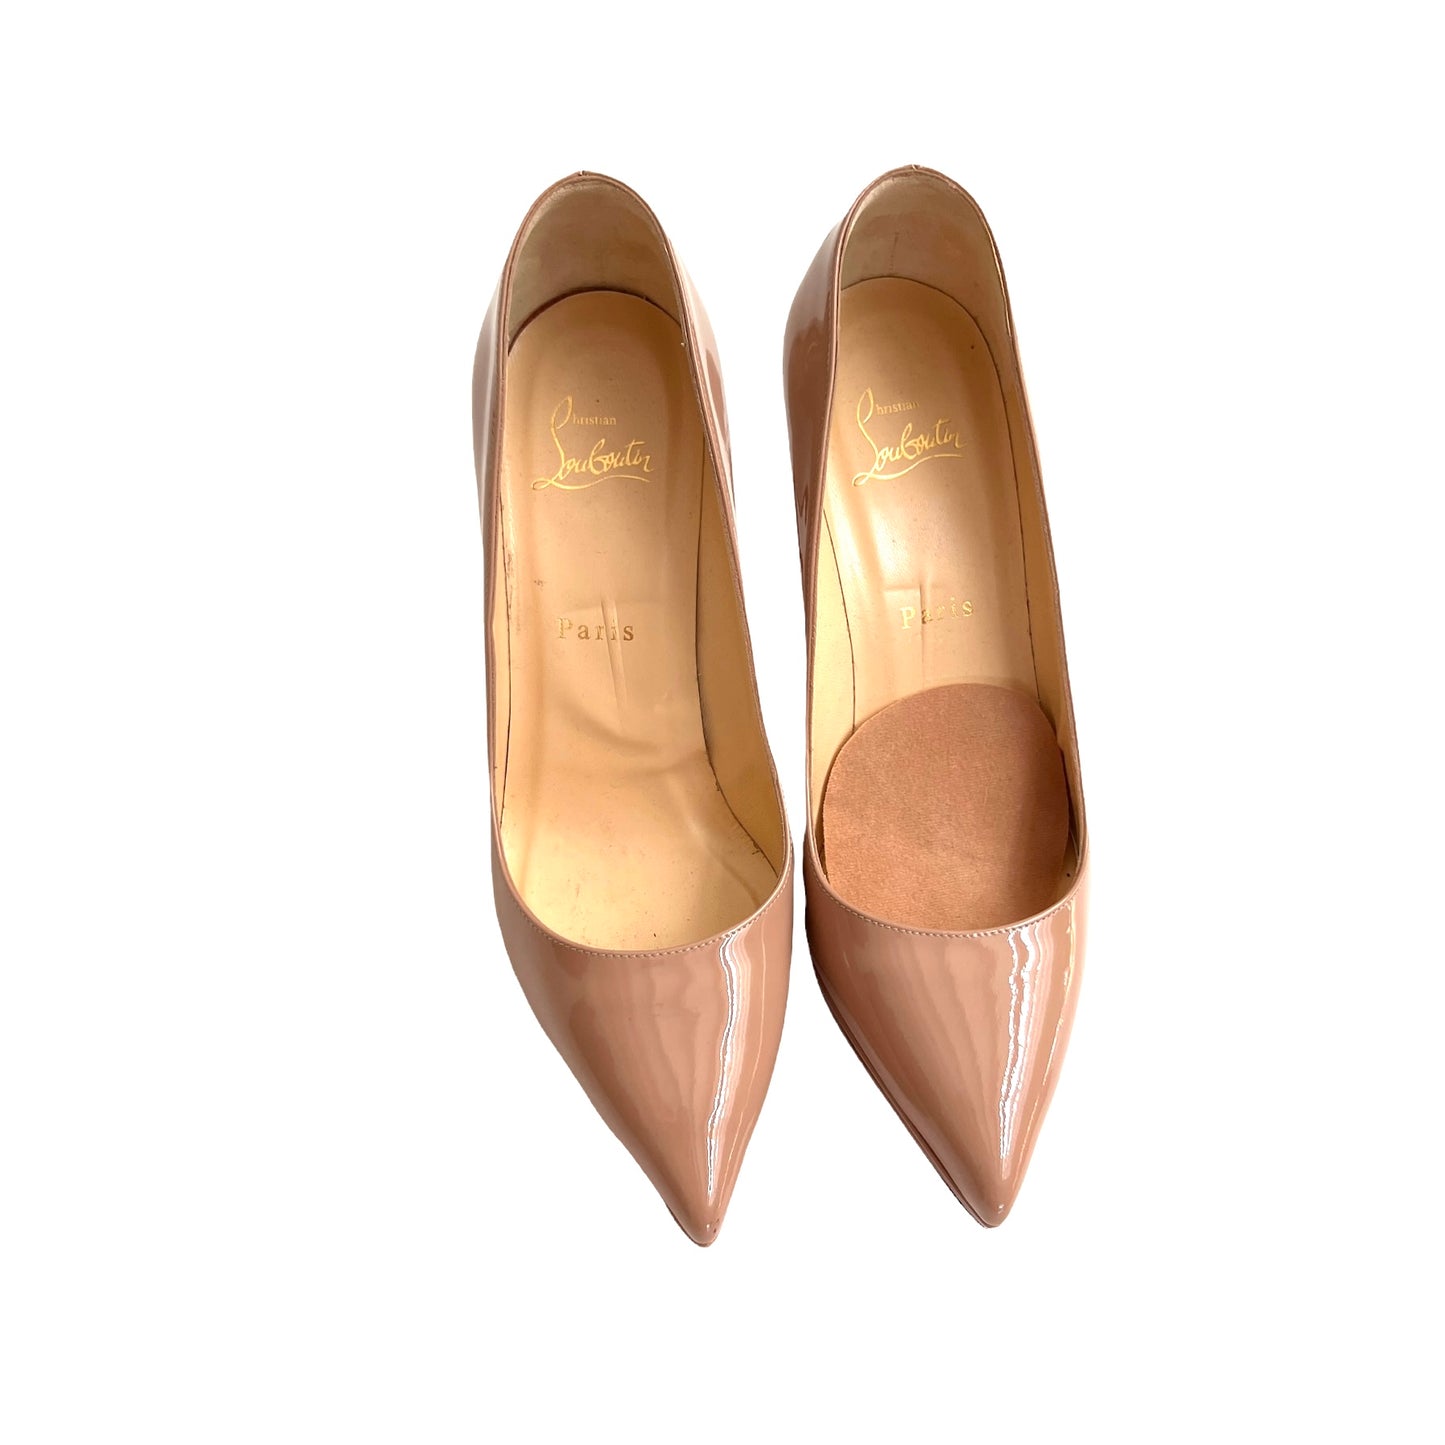 Nude Patent Leather Heels - 8..5